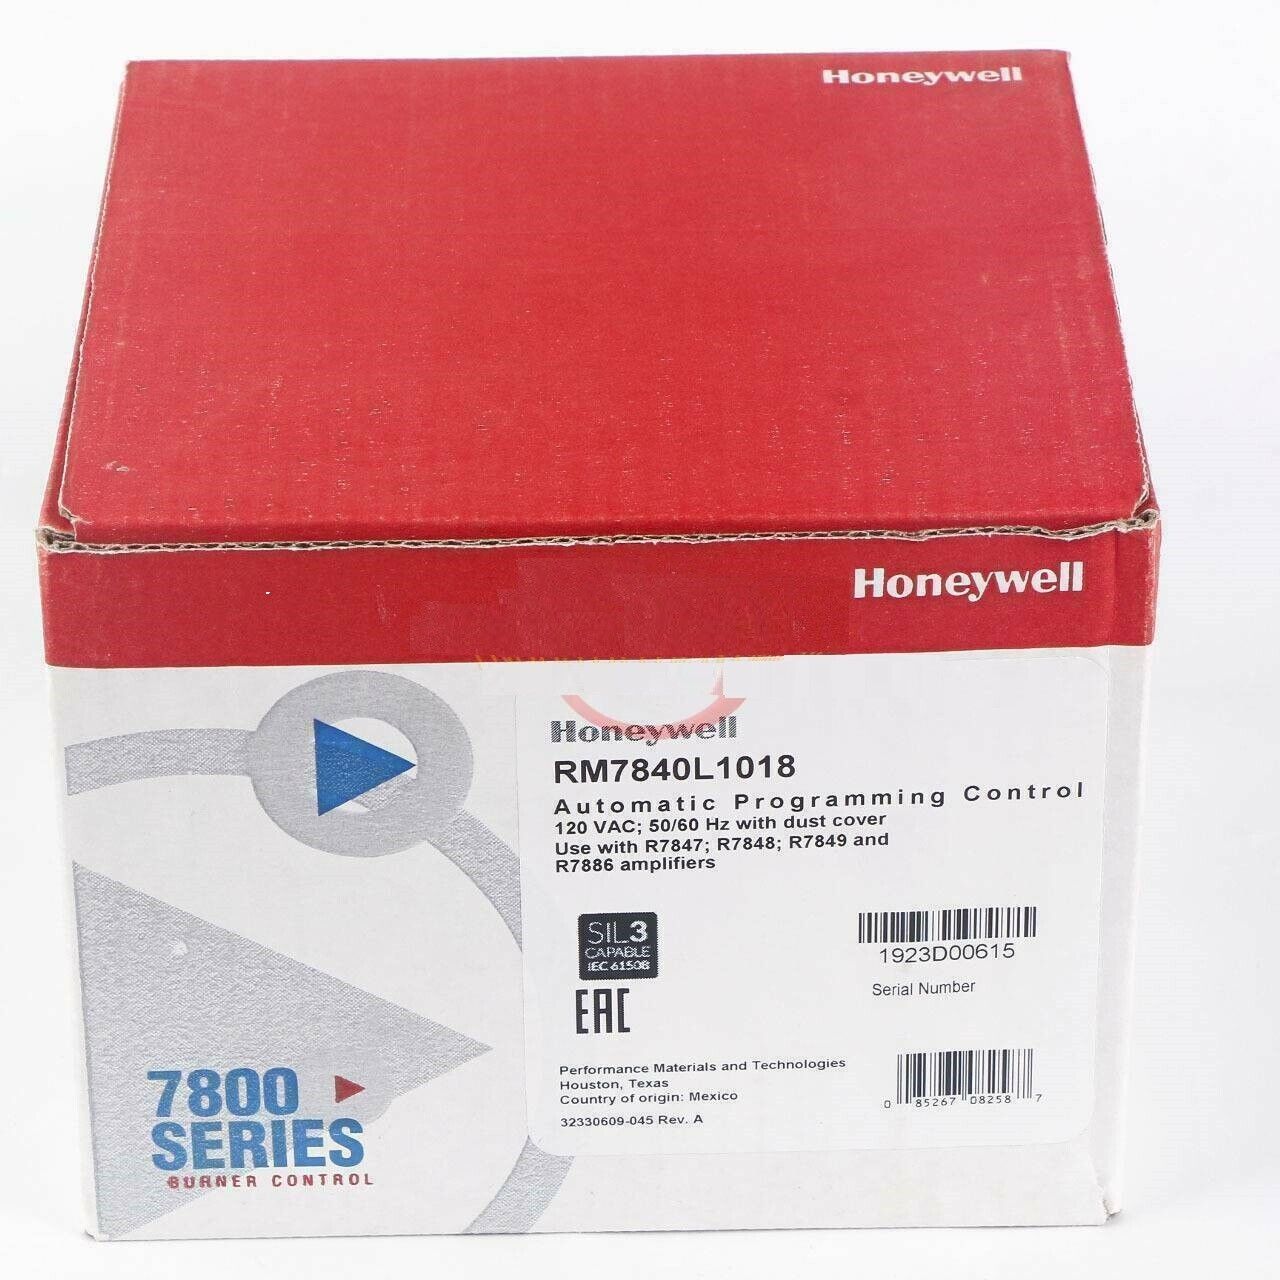 New In Box Honeywell RM7840L-1018 Burner Control RM7840L1018 Expedited Shipping